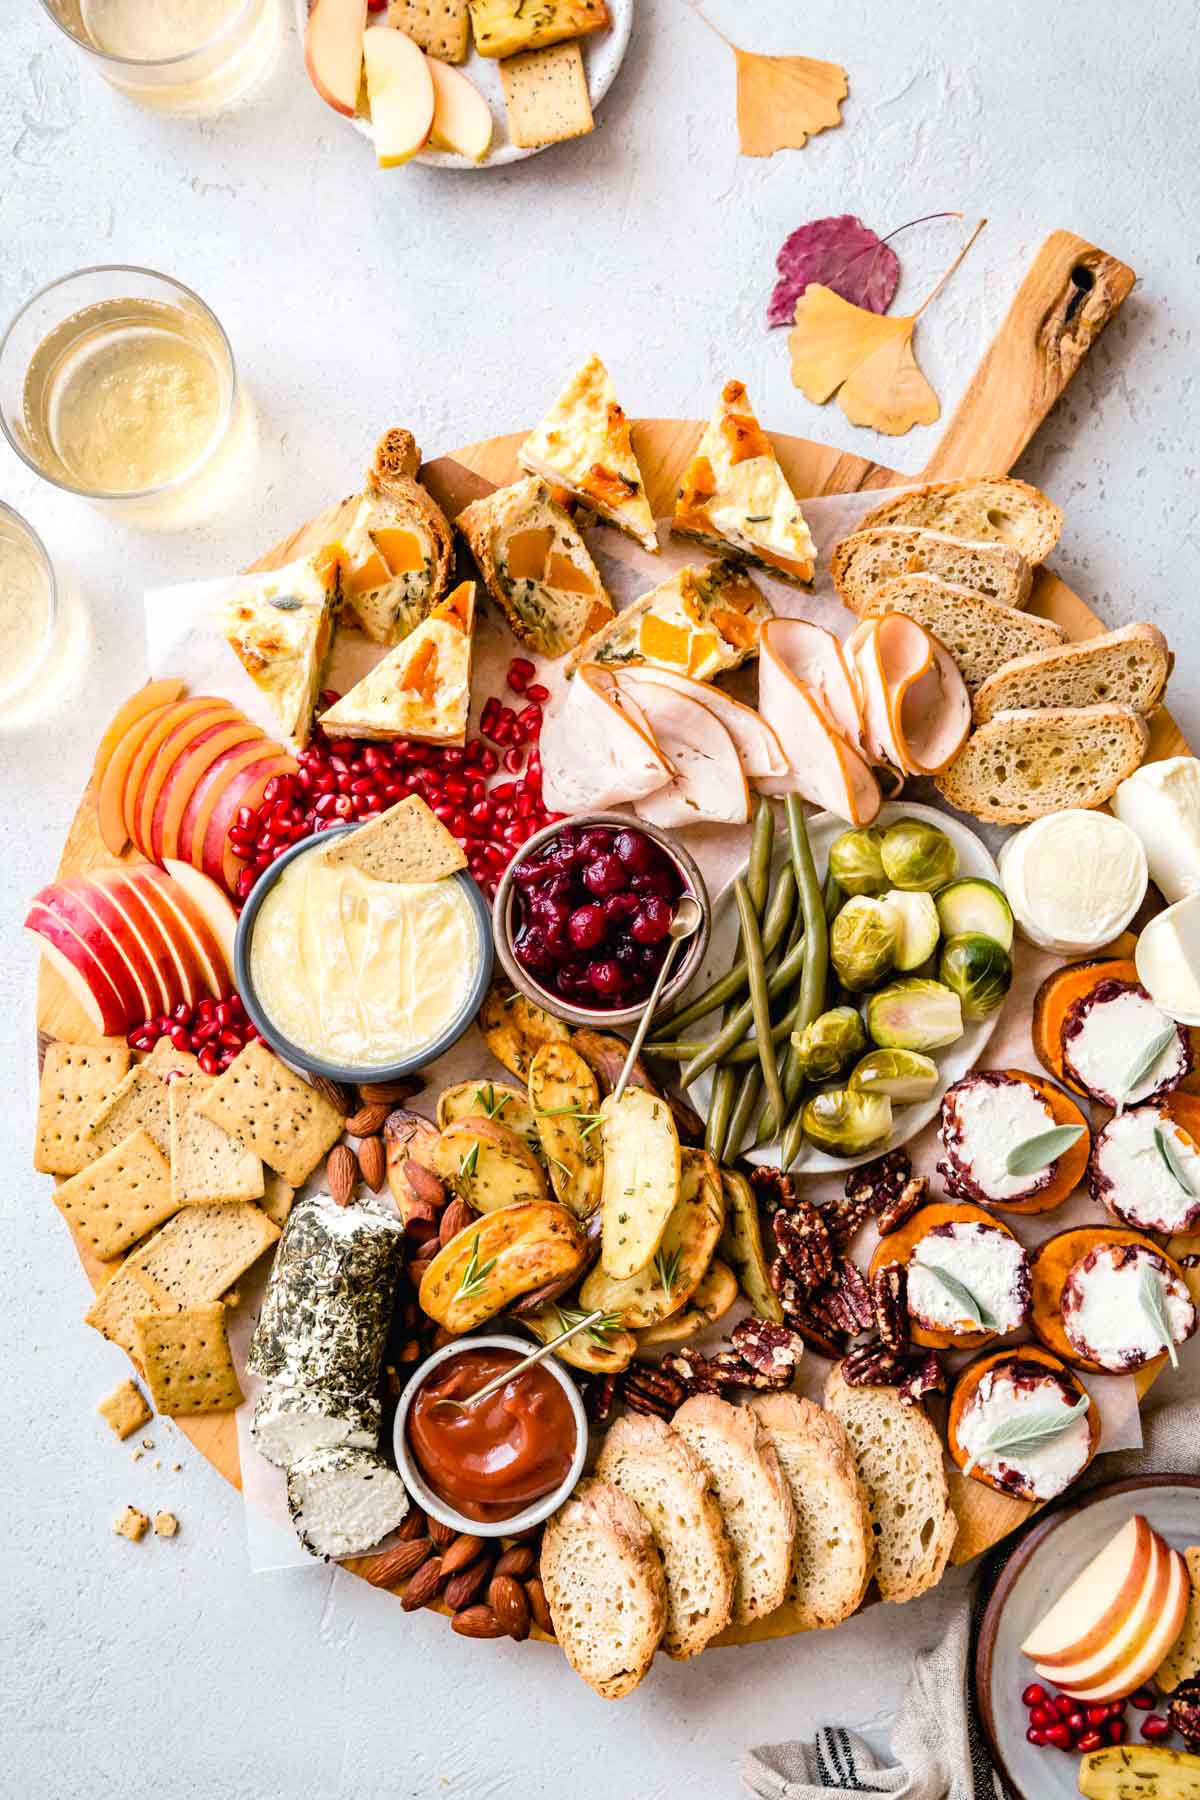 A fall harvest cheese board replete with cheeses, quiche pieces, bread, turkey, pickled veggies, cranberries, apples, sweet potato bites, and roasted potatoes